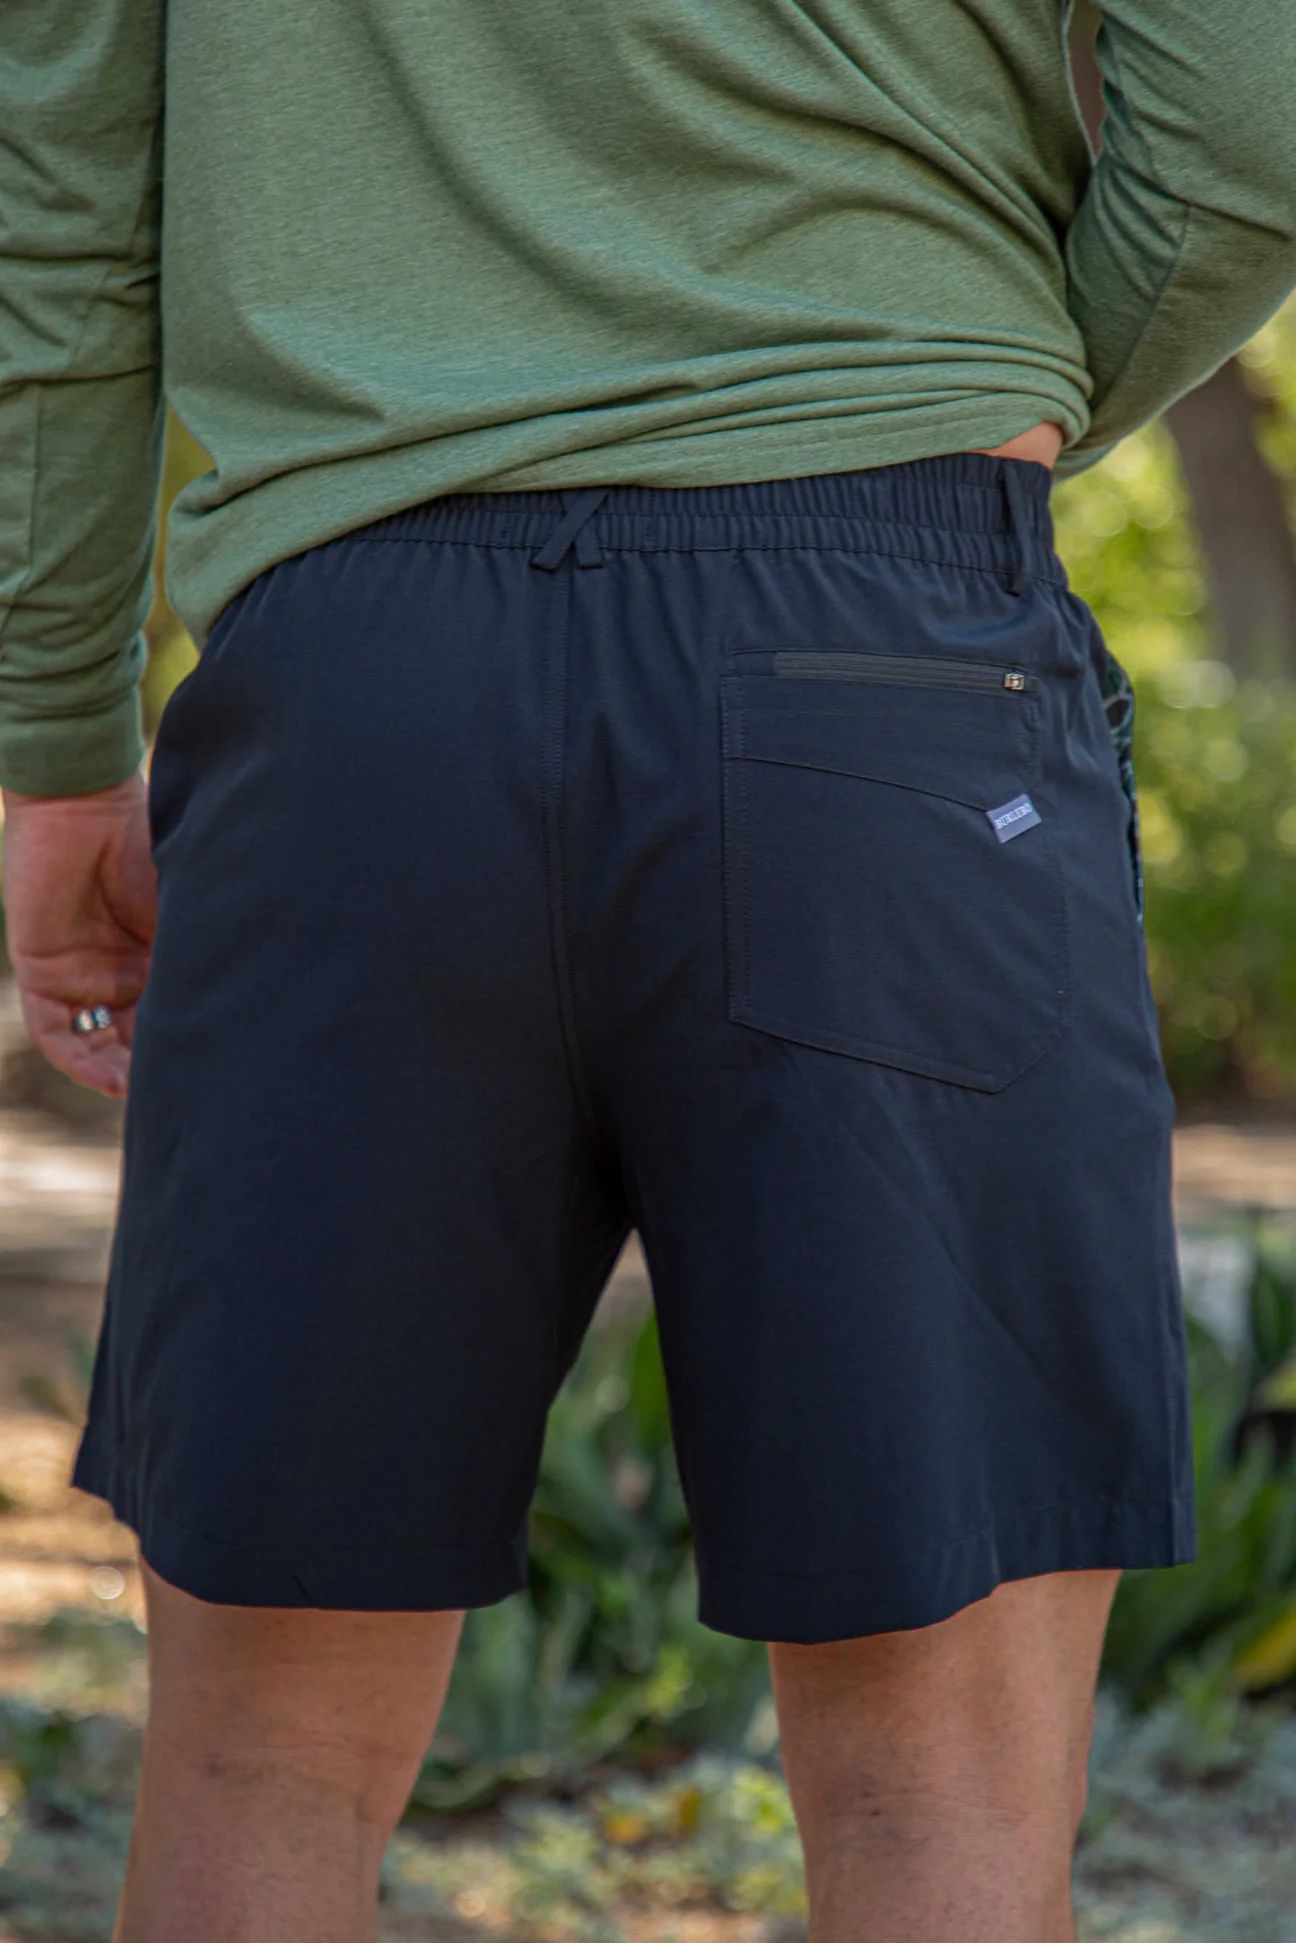 Burlebo Matte Black with Duck Camo Pockets Everyday Shorts